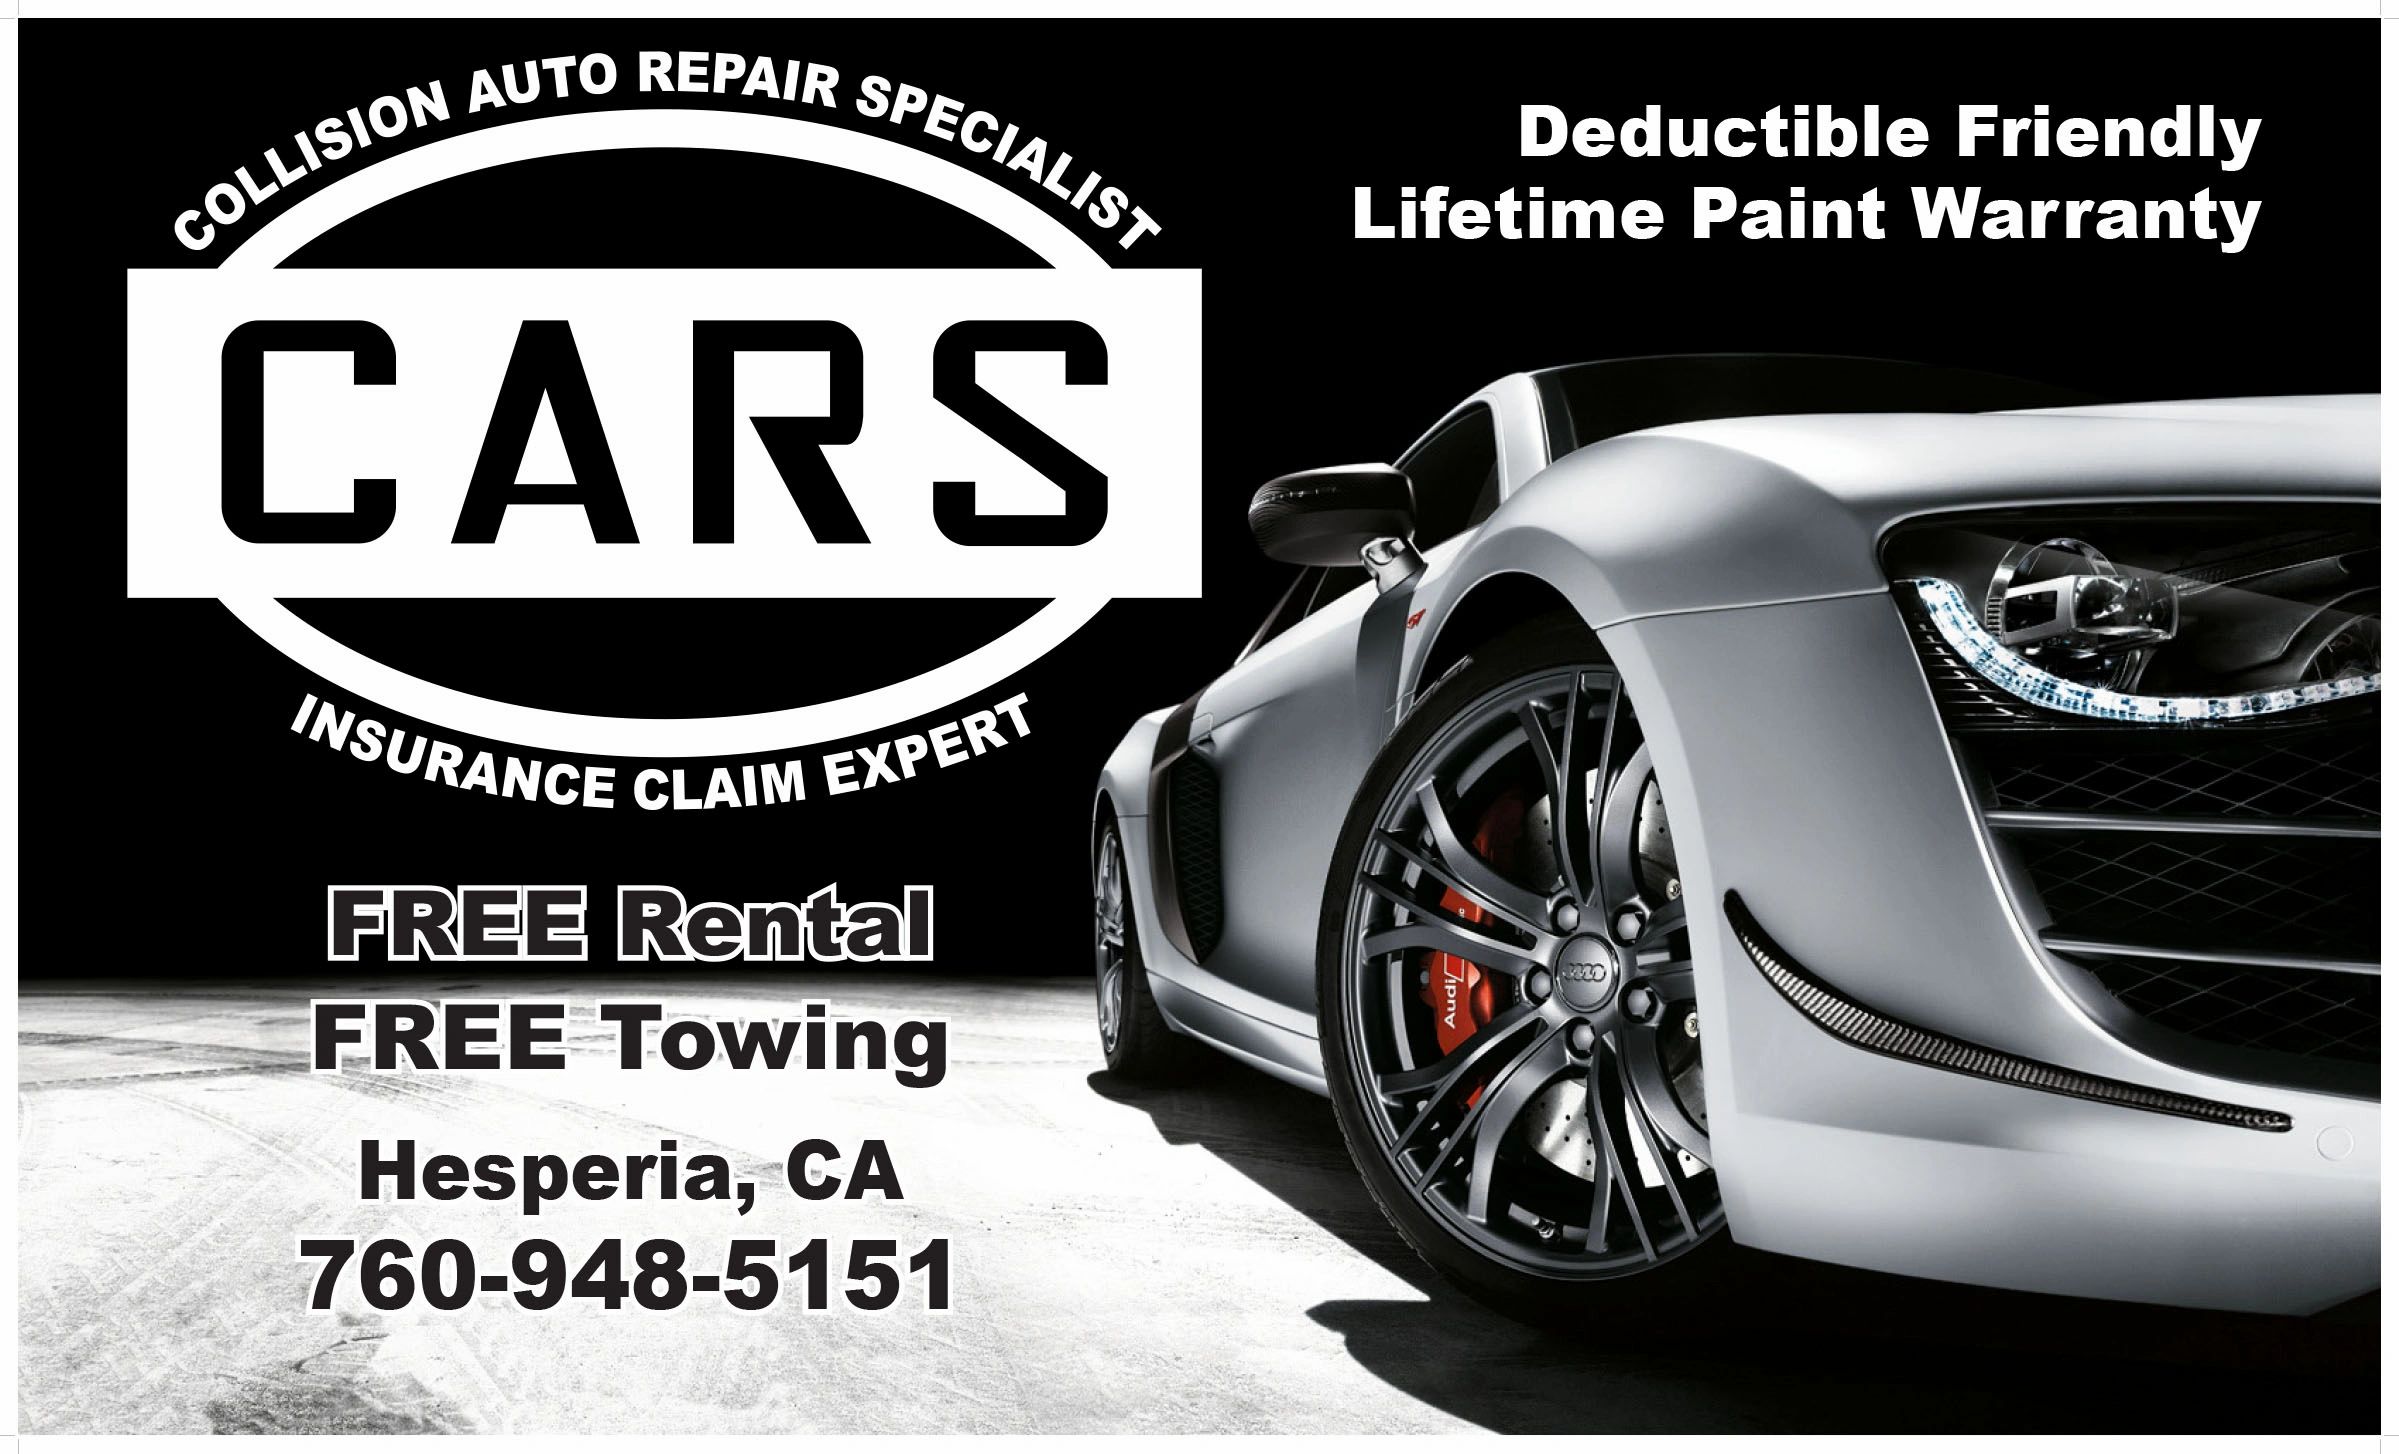 Collision Auto Repair Specialists - C.A.R.S.